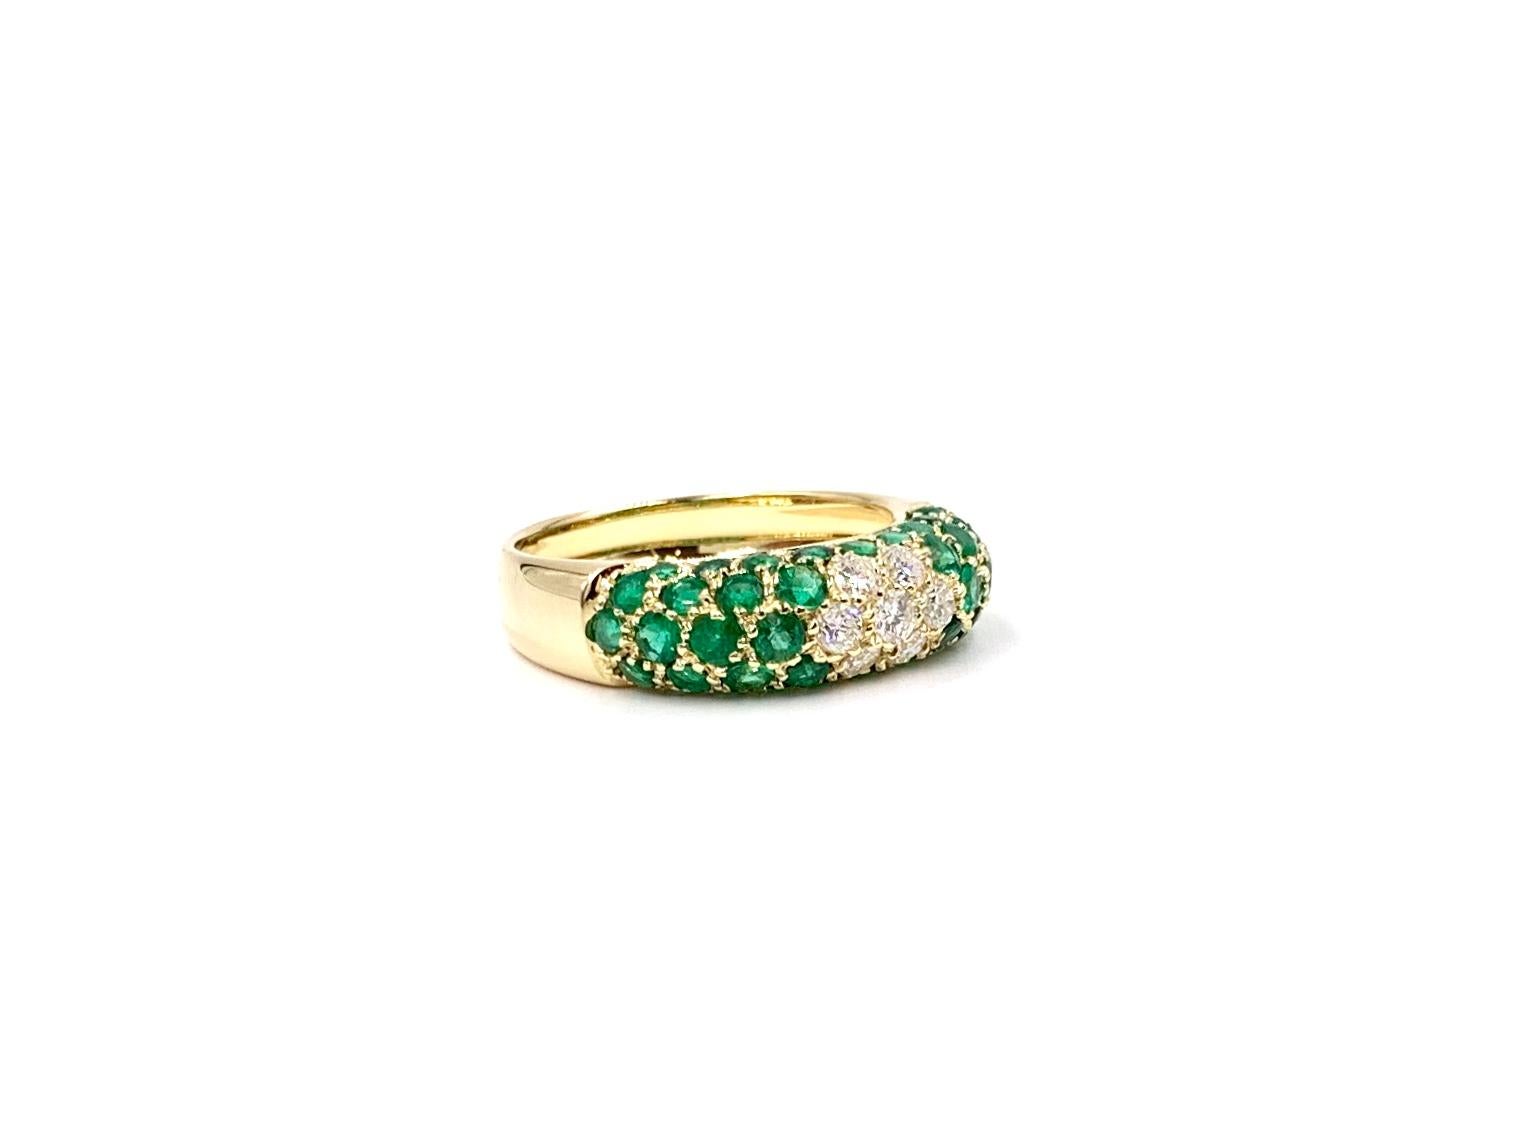 A beautiful and wearable 18 karat yellow gold Italian made slightly domed 6mm wide band ring featuring 2.47 carats of vivid, well saturated green emeralds and .40 carats of high quality round diamonds. Diamond quality is approximately F color, VS2